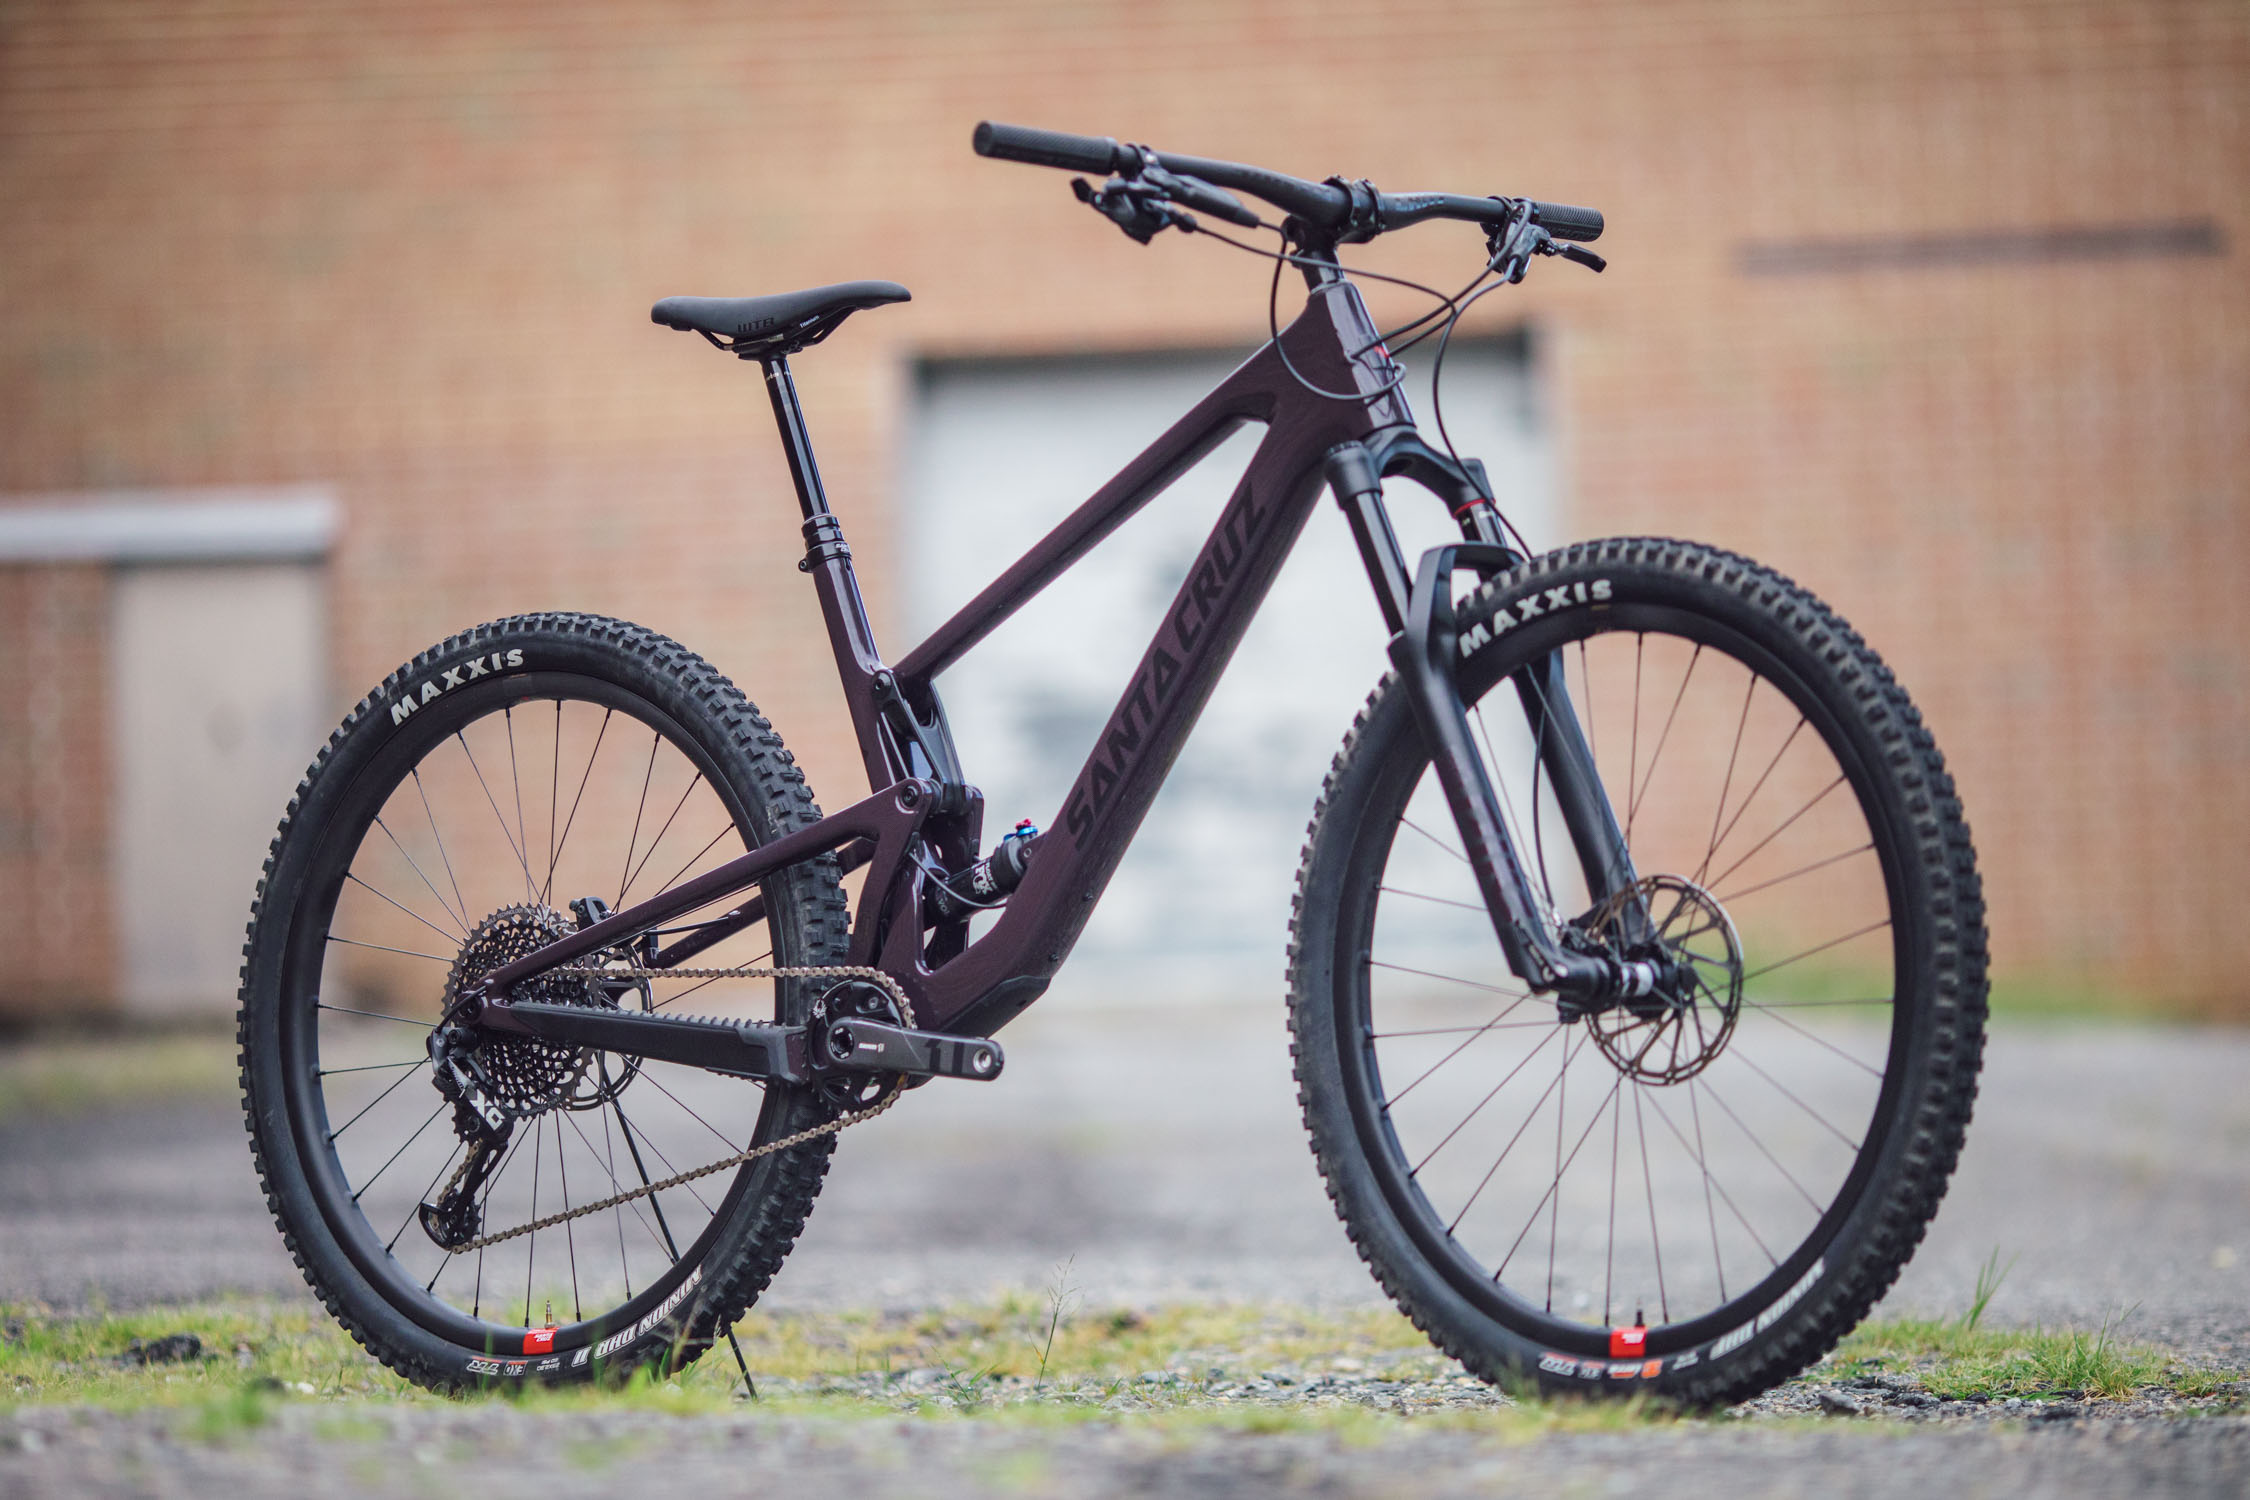 2019 tallboy review